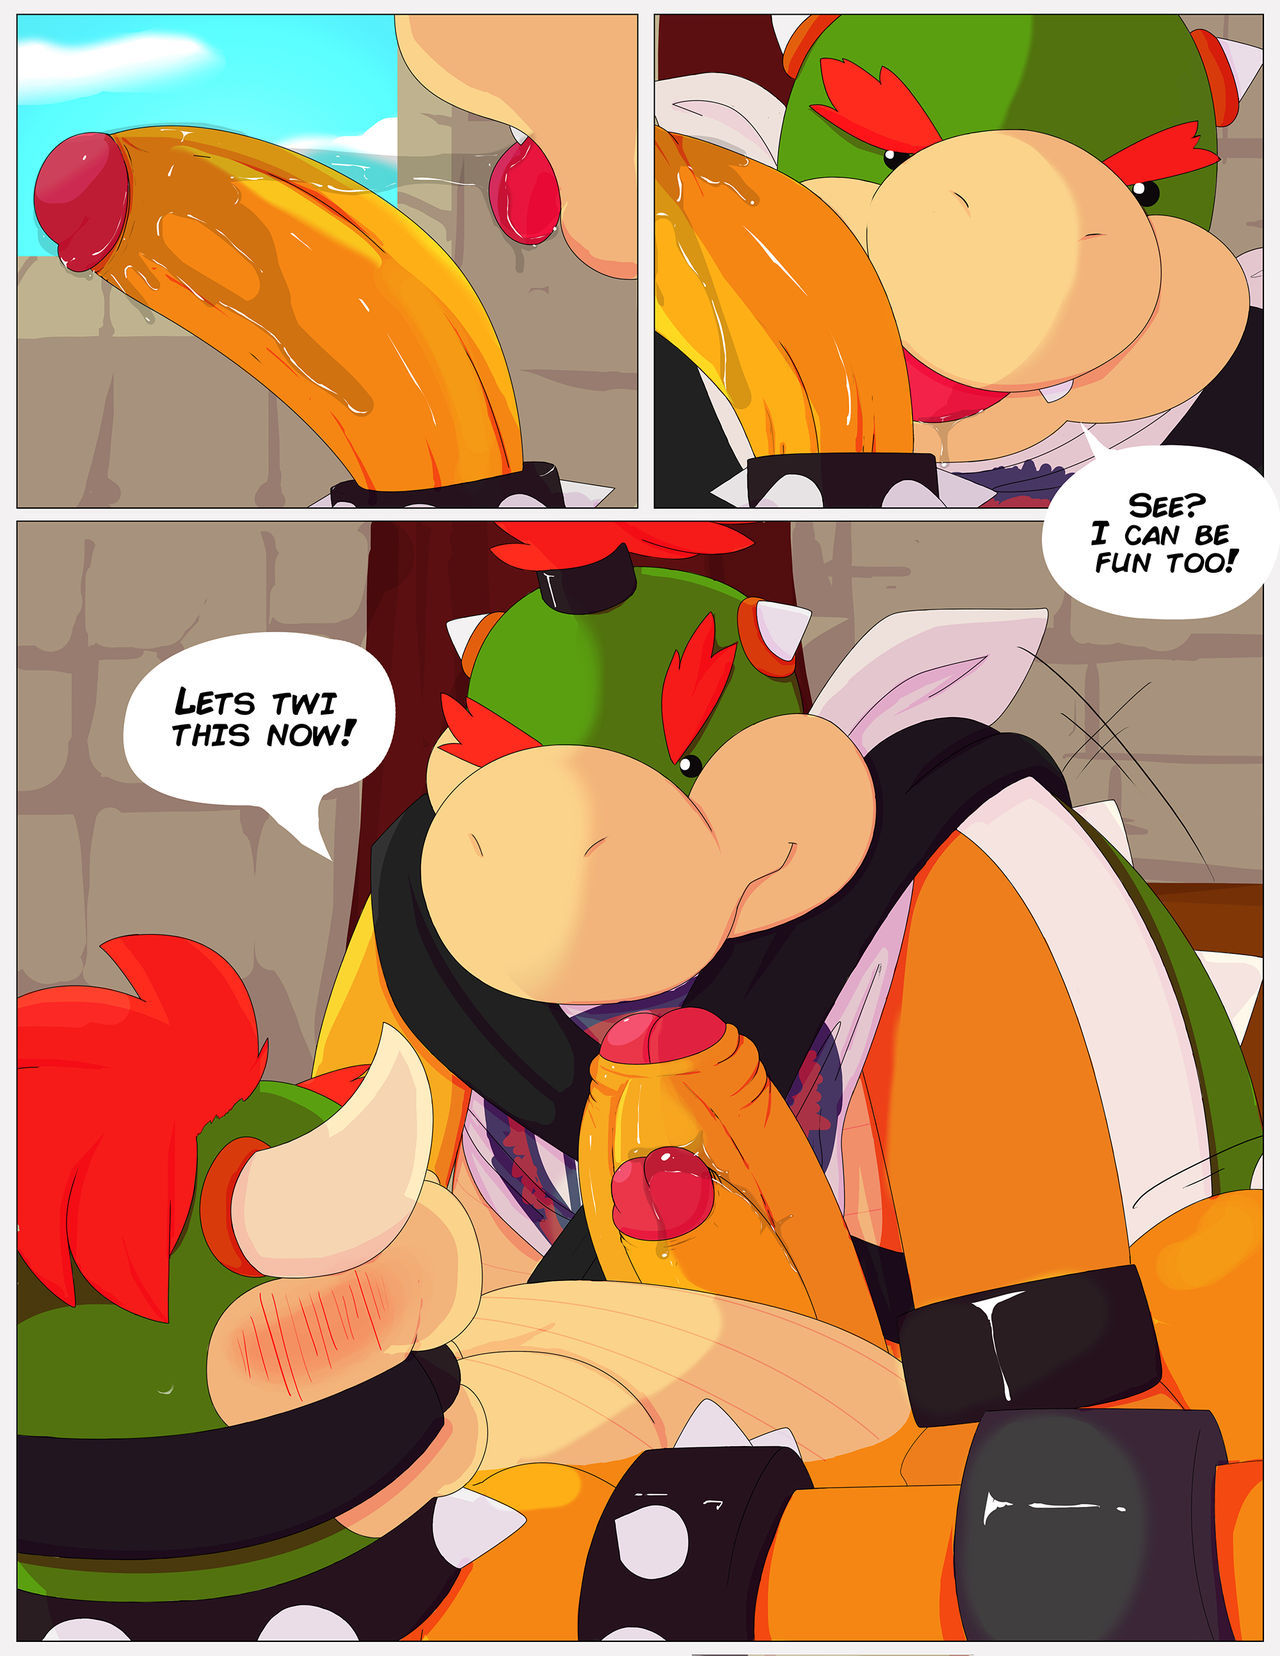 Family Bonding - Super Mario Brothers page 6